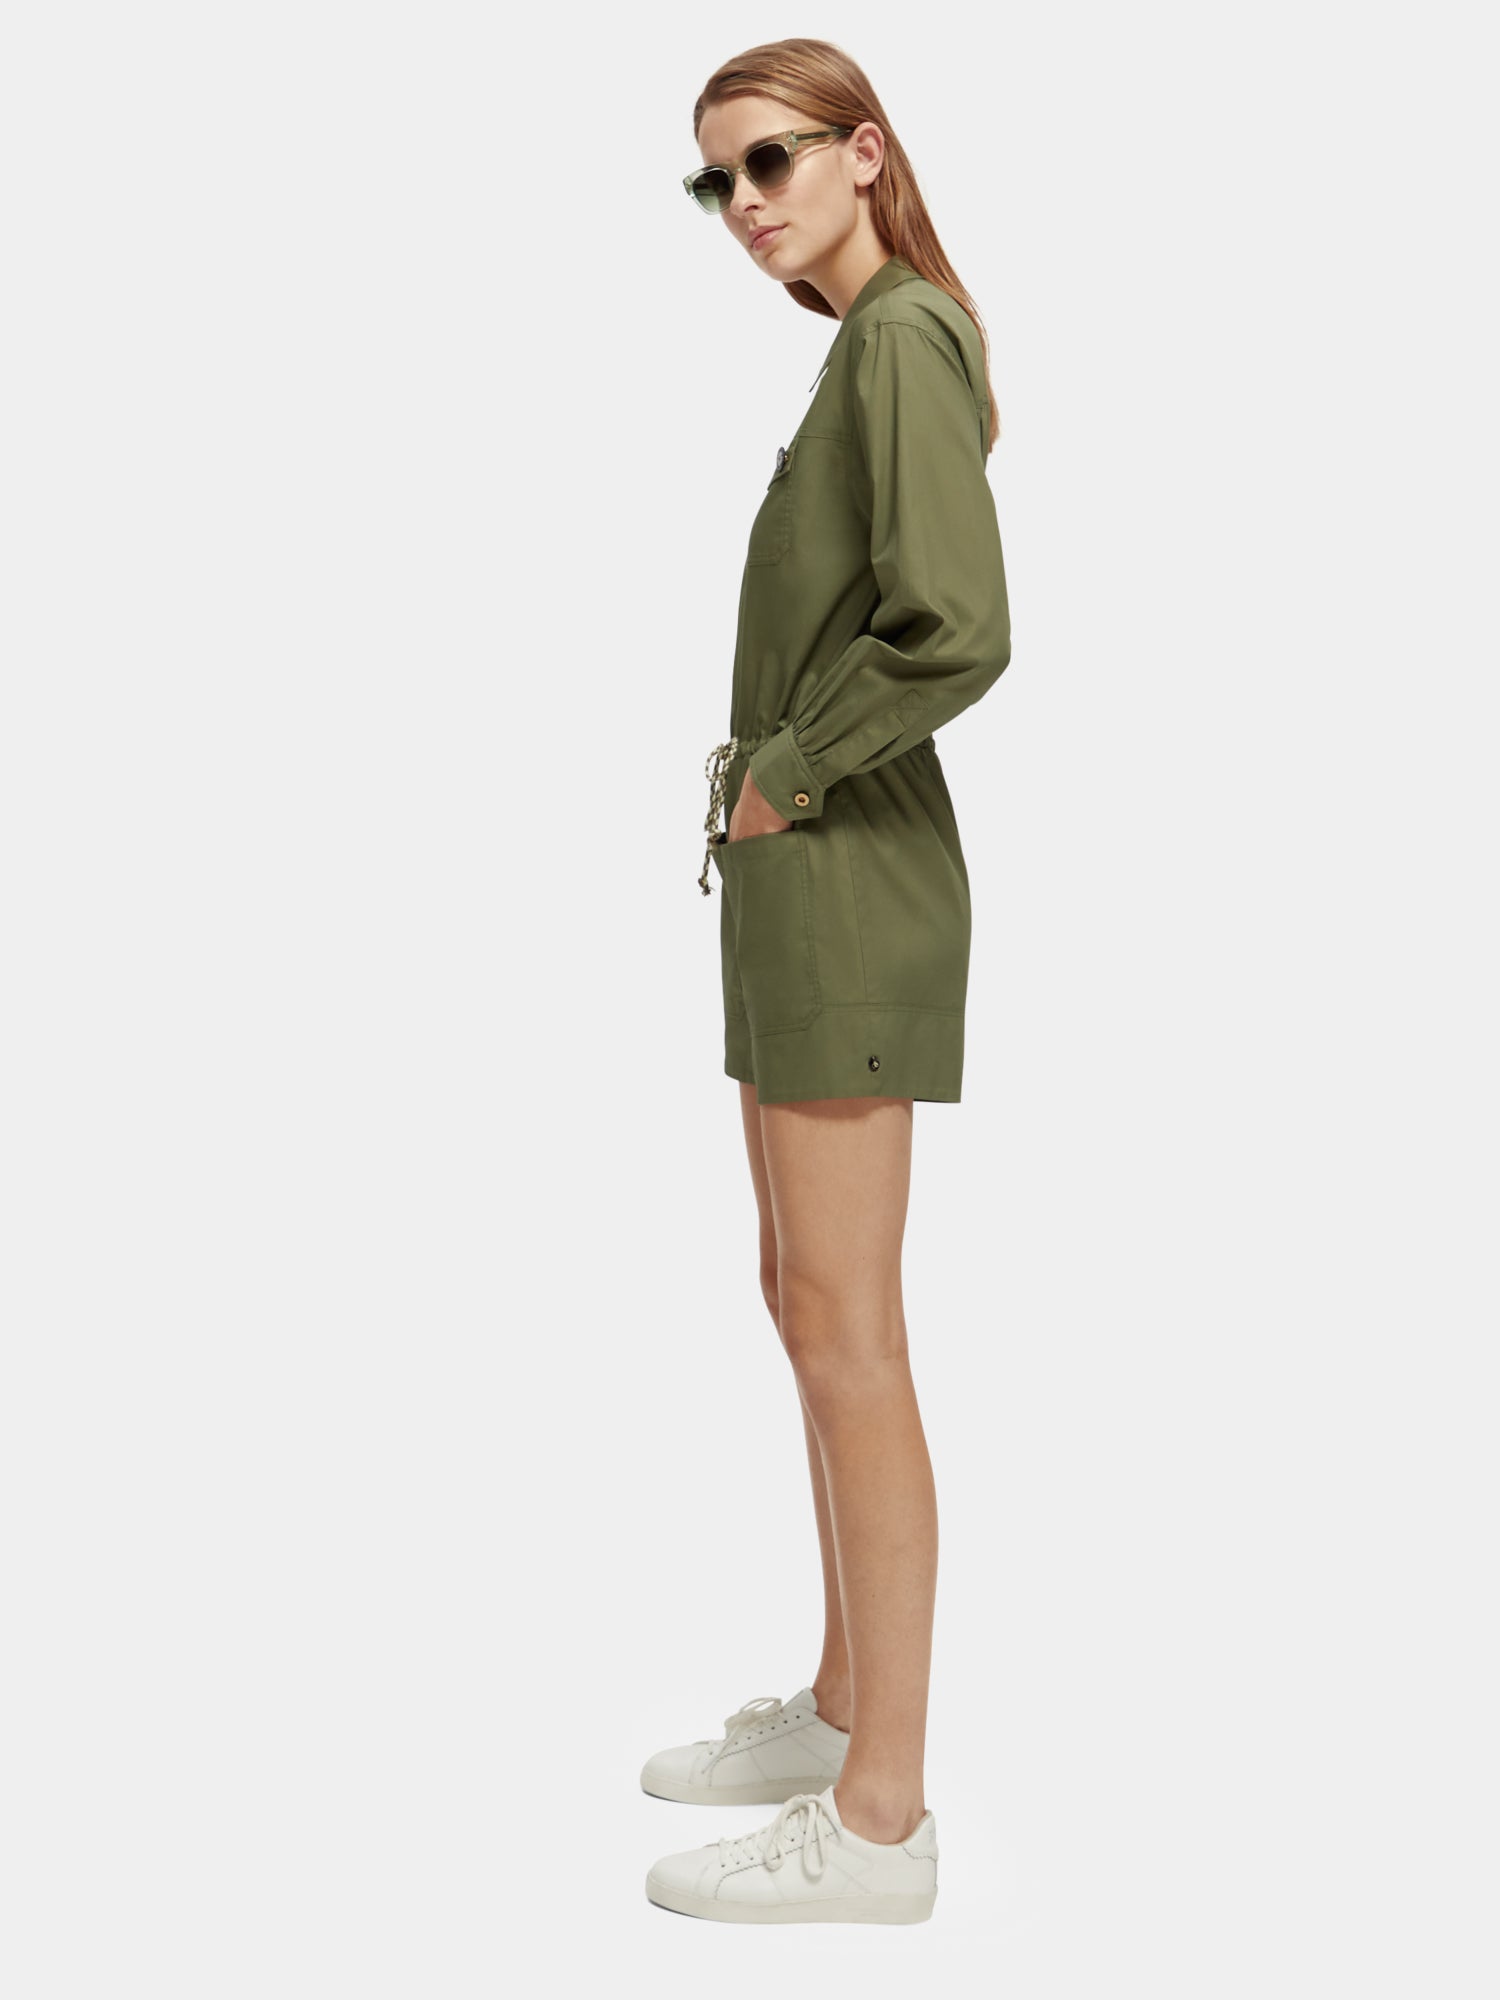 Military playsuit - Olive Green